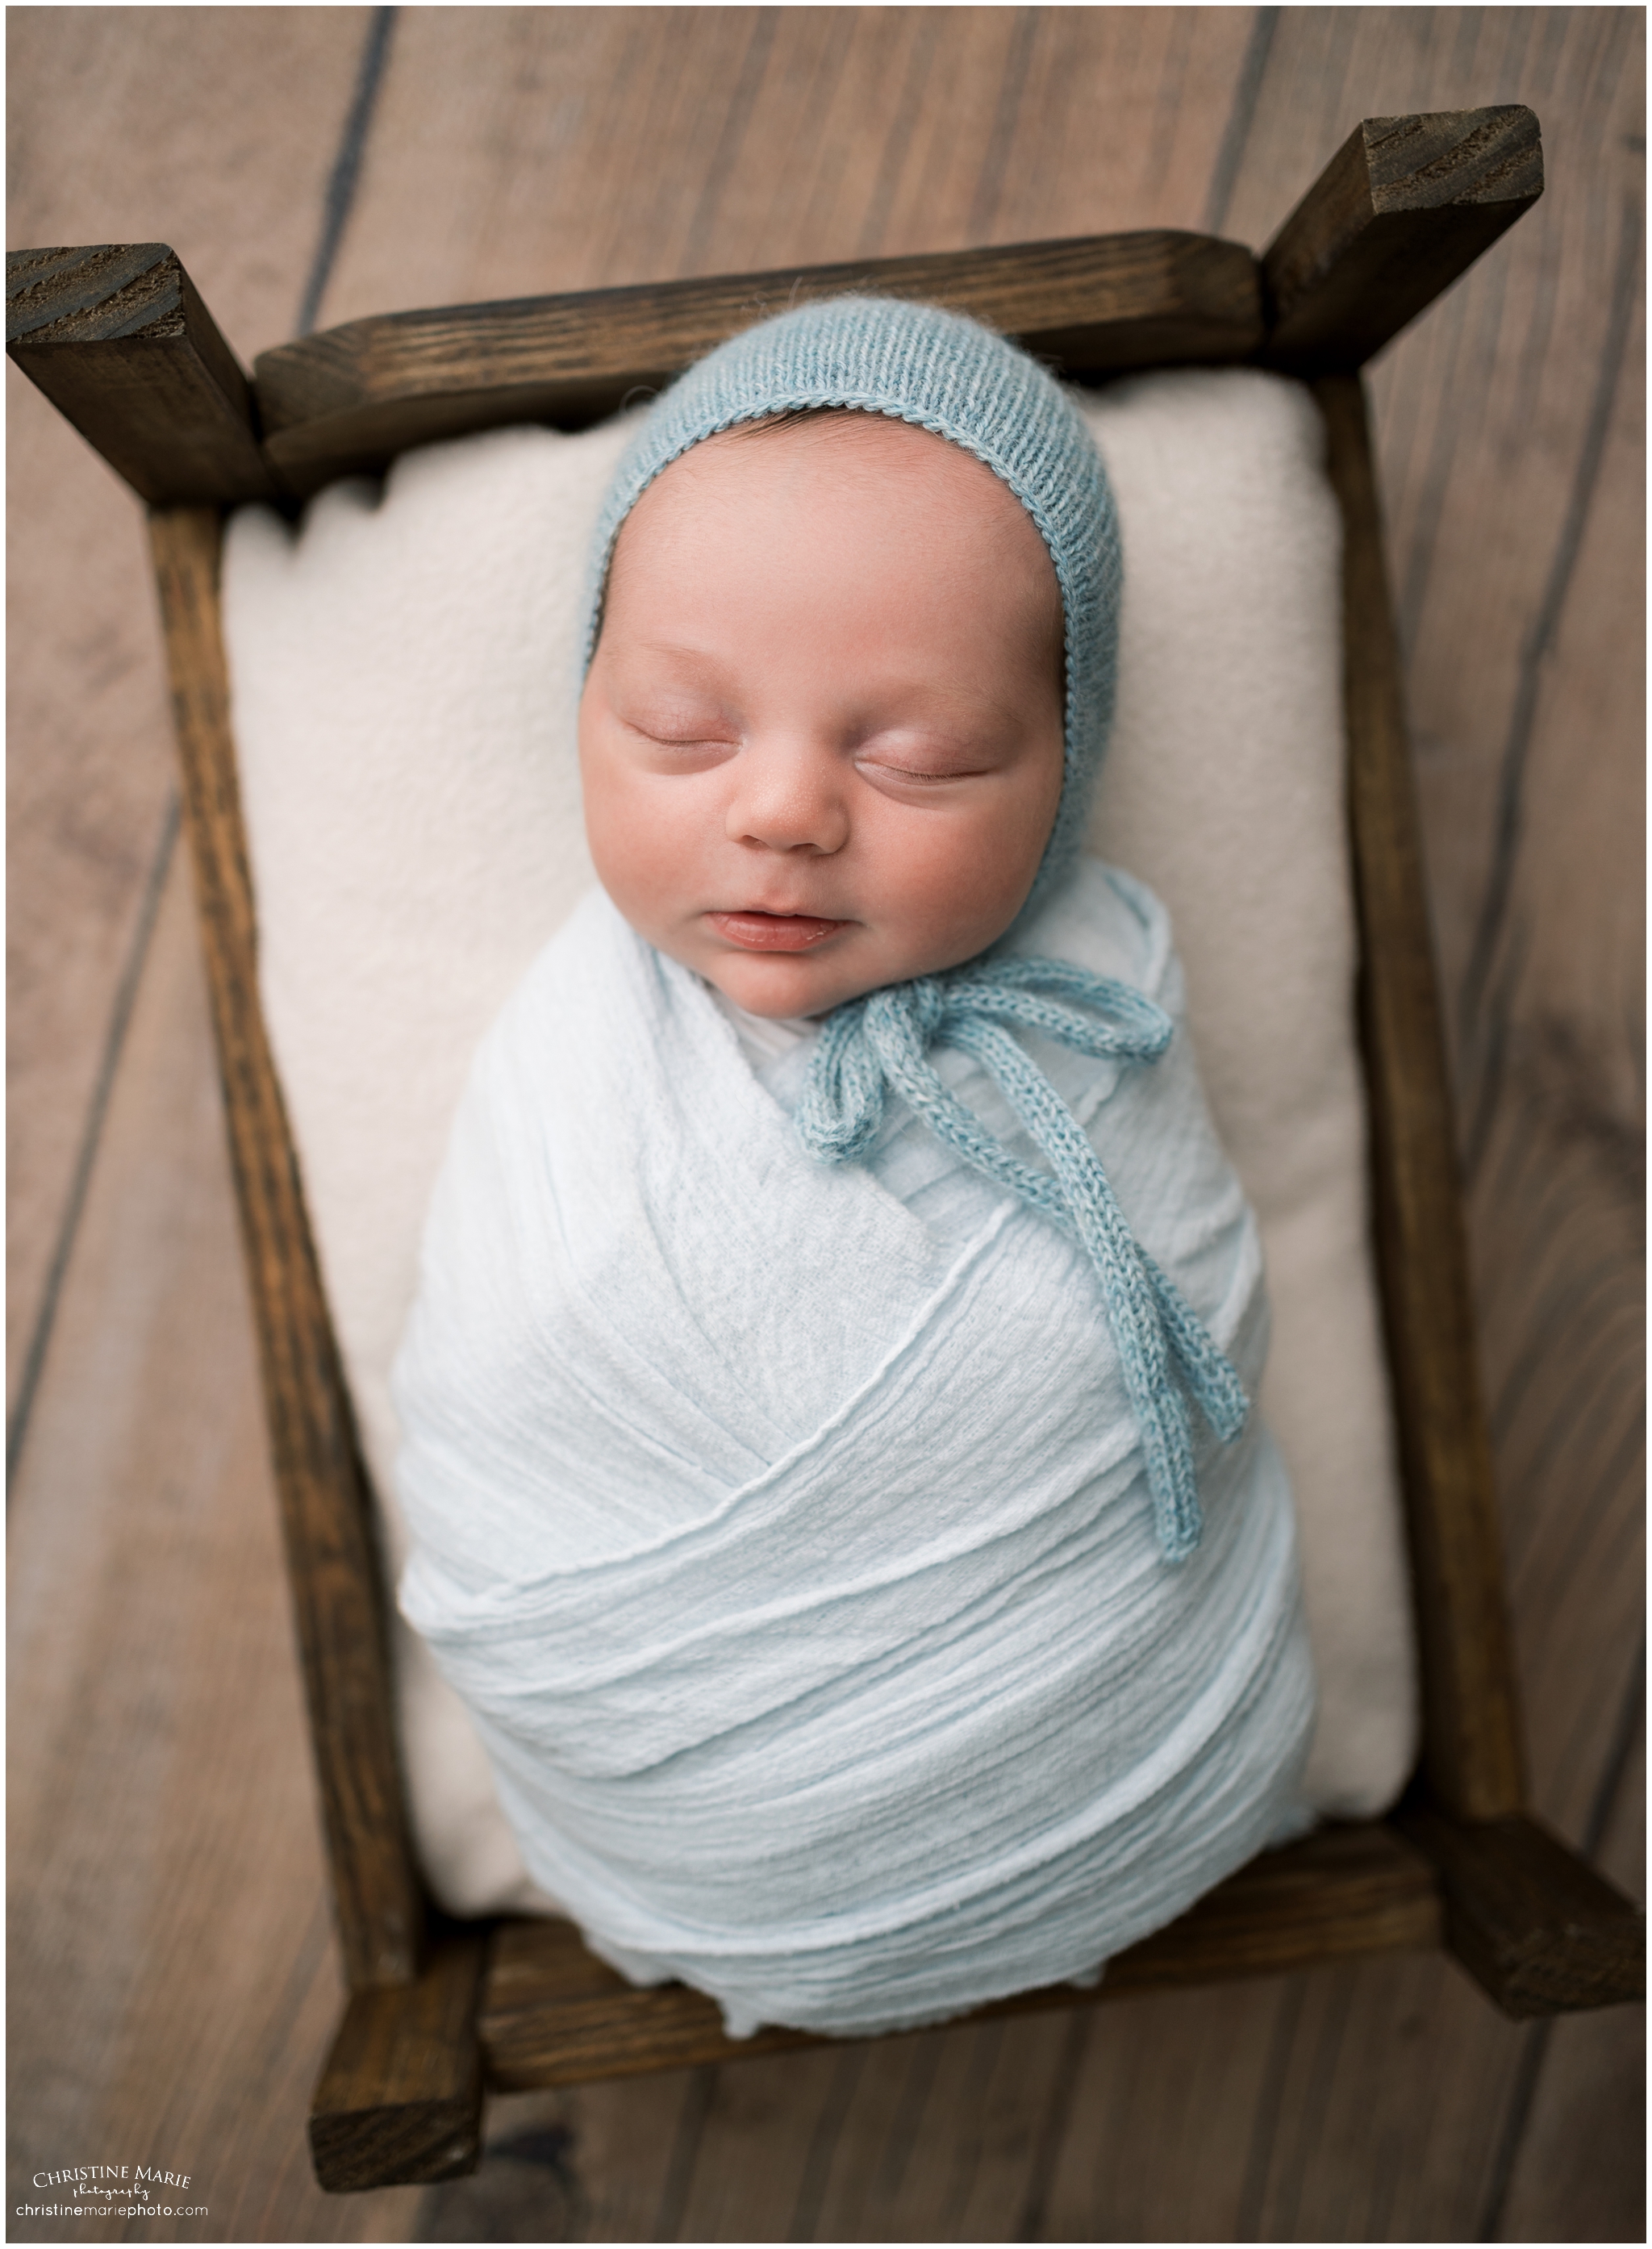 baby boy in bonnet sleeping on tiny wooden bed